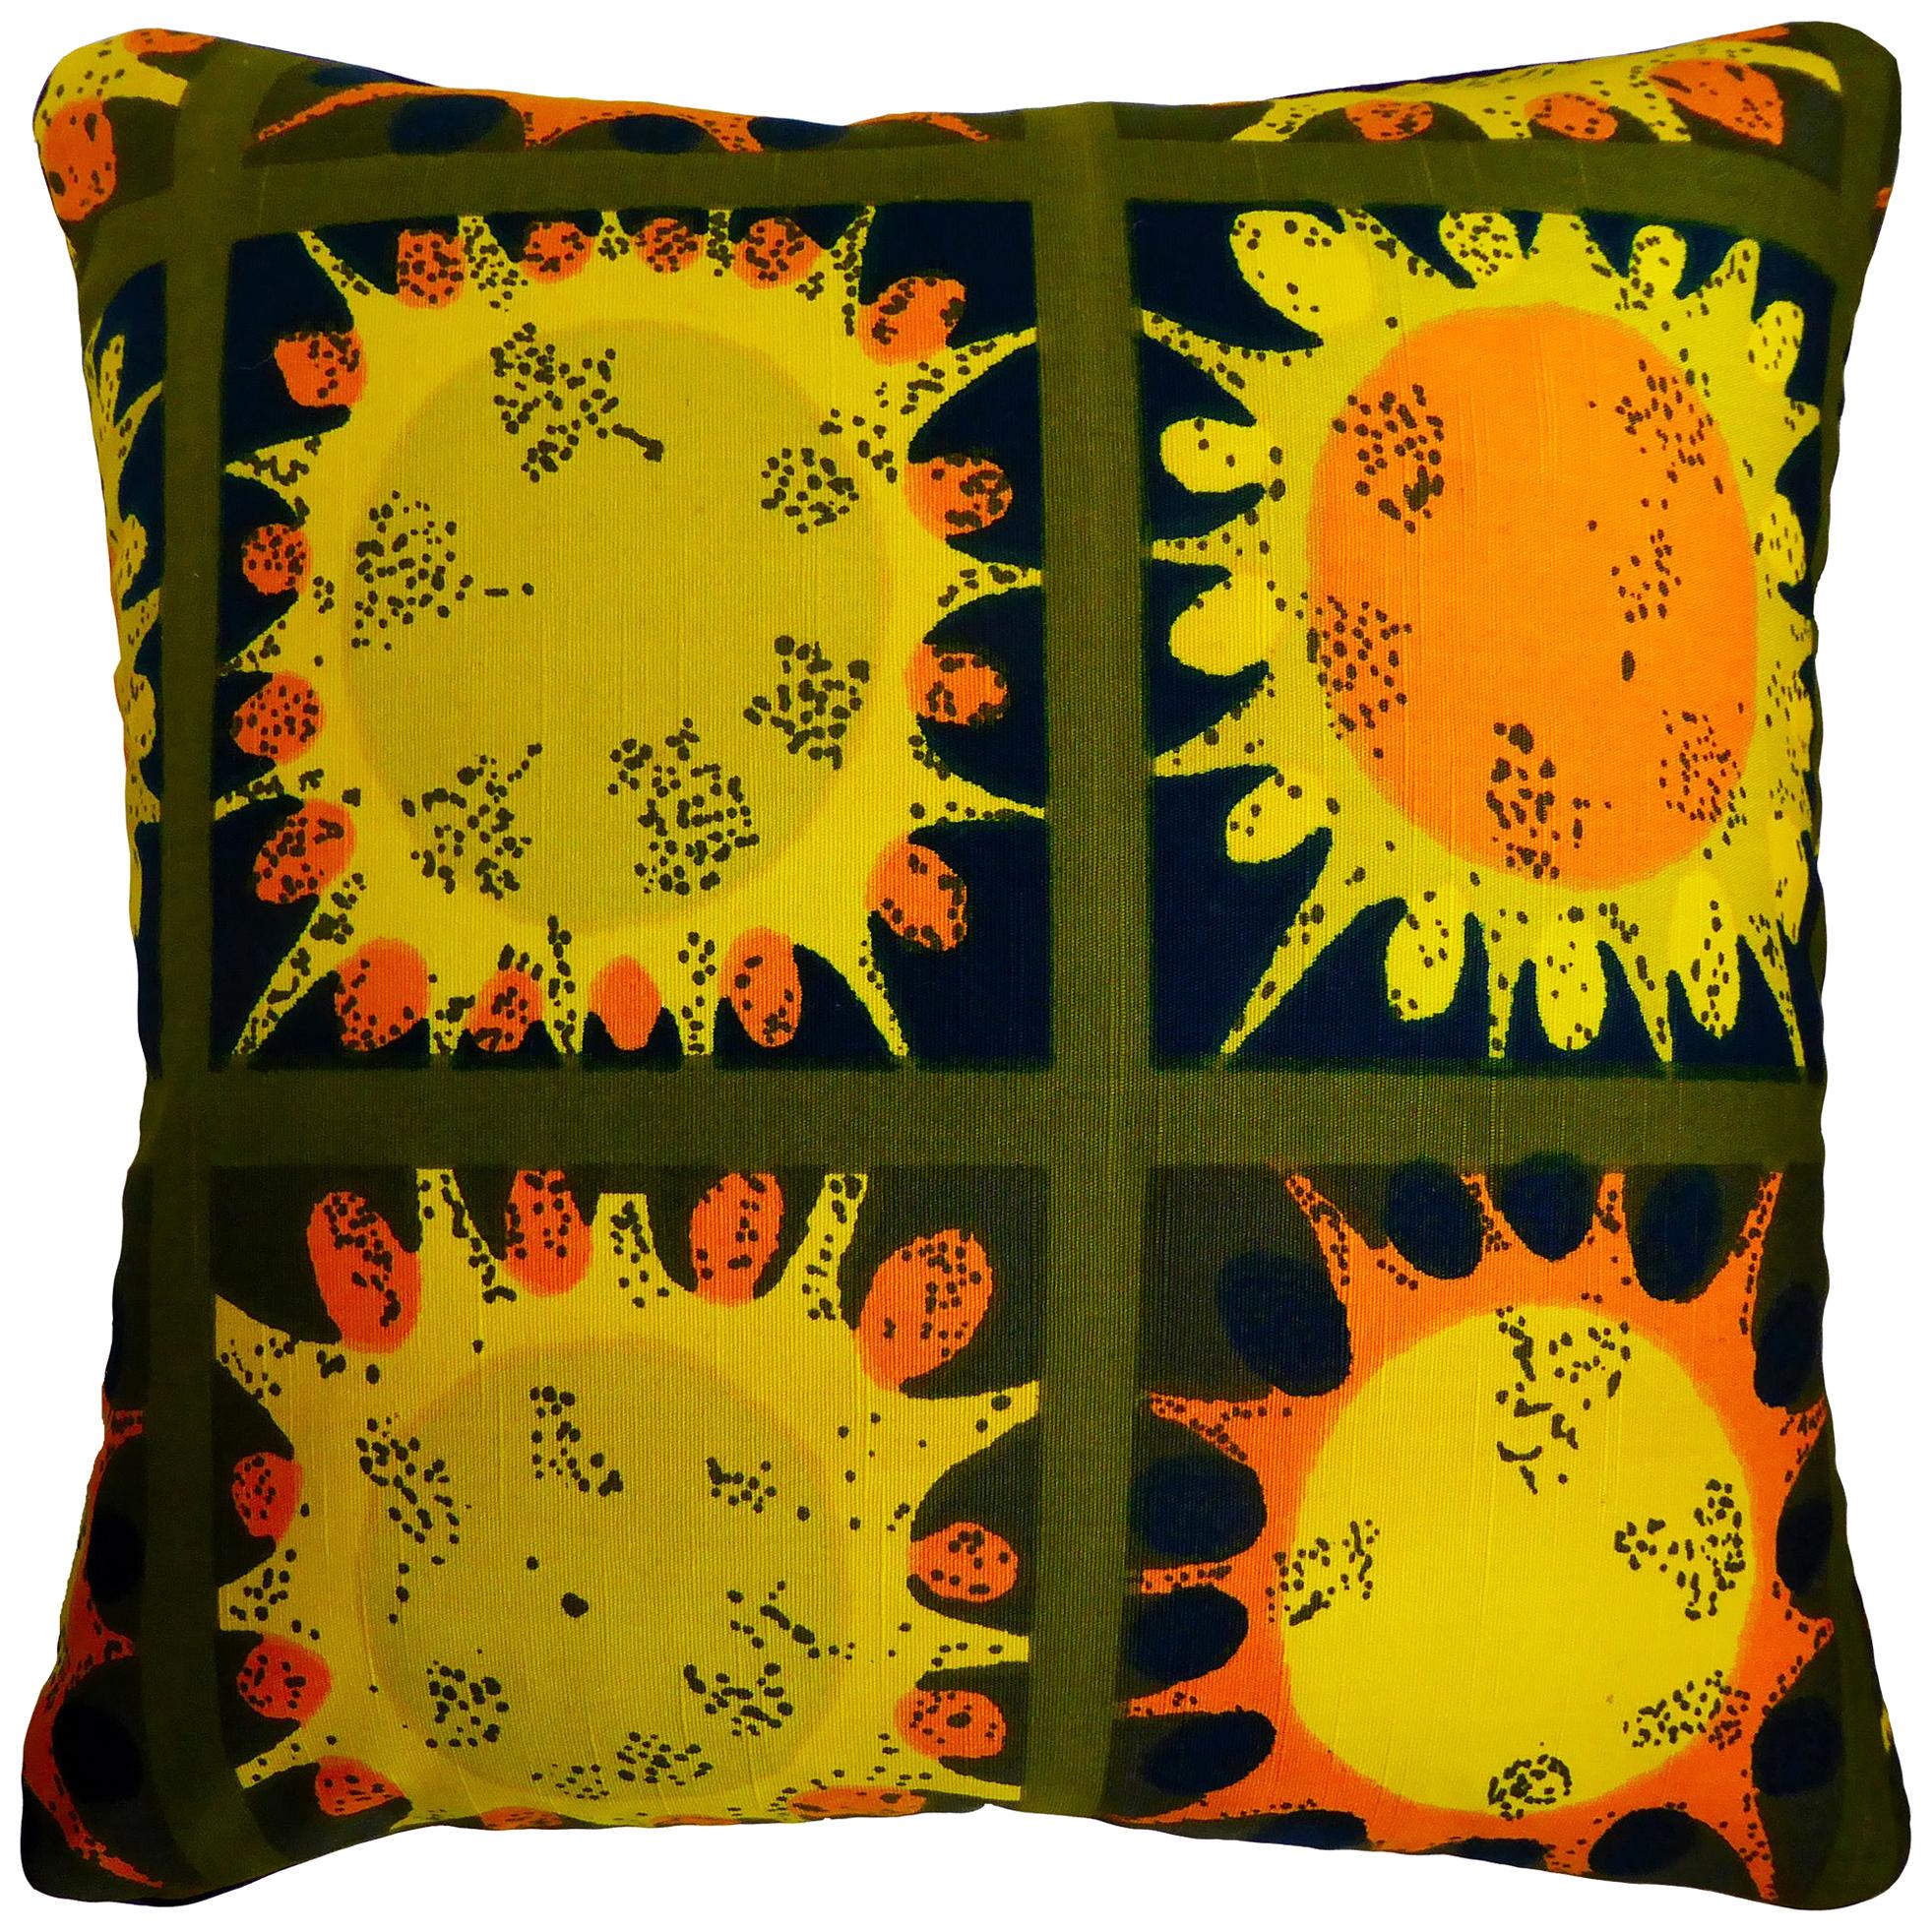 Vintage Cushions, Luxury Bespoke-Made Pillow ‘Paintball', Made in London